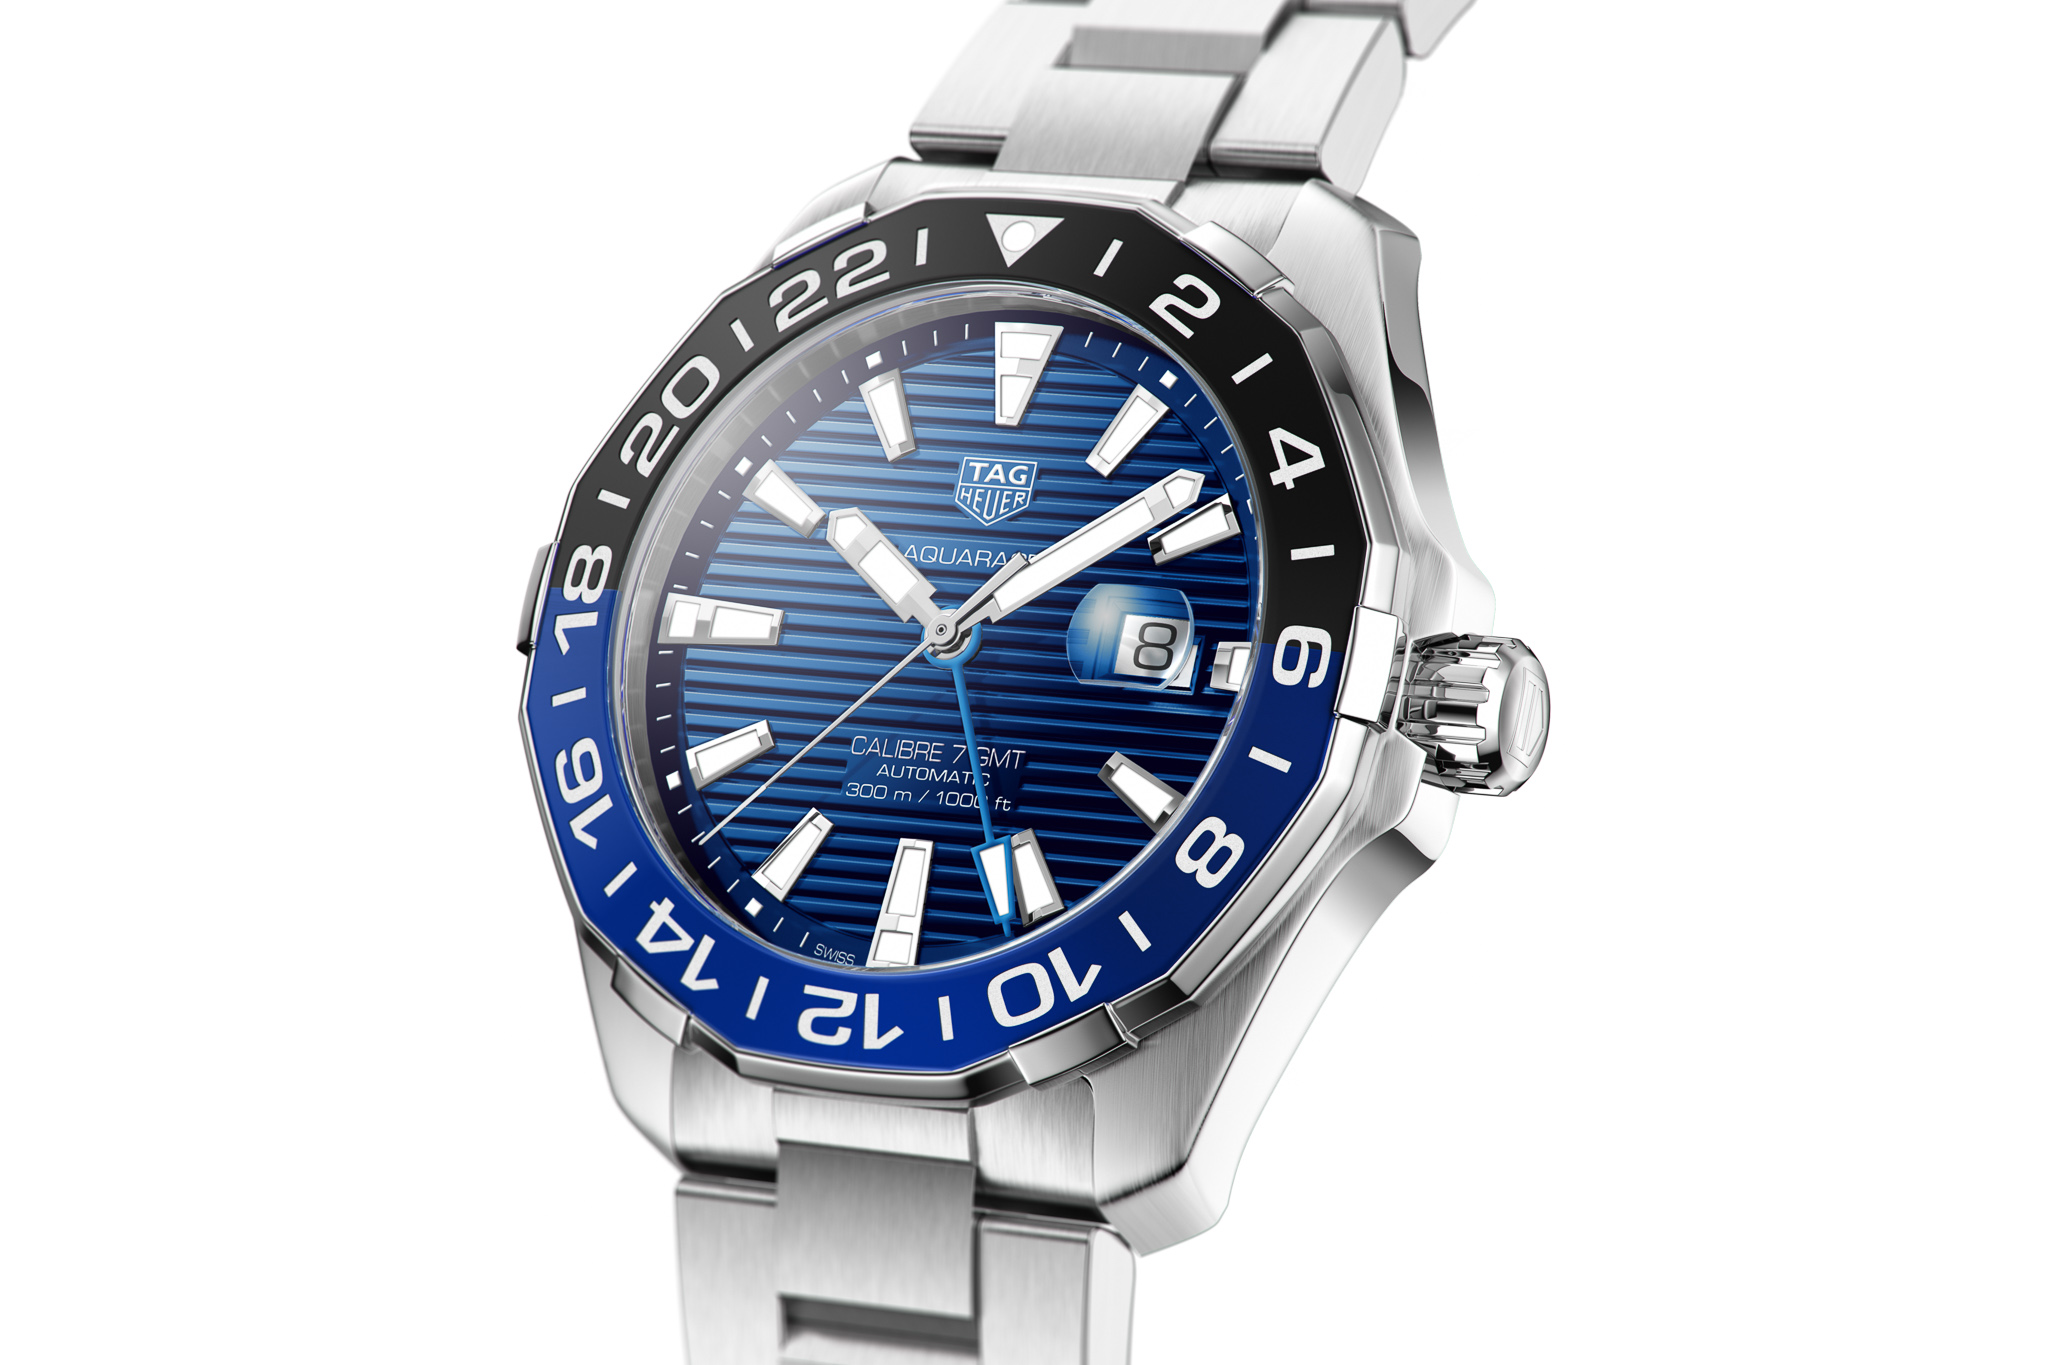 Introducing The TAG Heuer Aquaracer Calibre 7 GMT Blue Dial Watch –  WristReview.com – Featuring Watch Reviews, Critiques, Reports & News